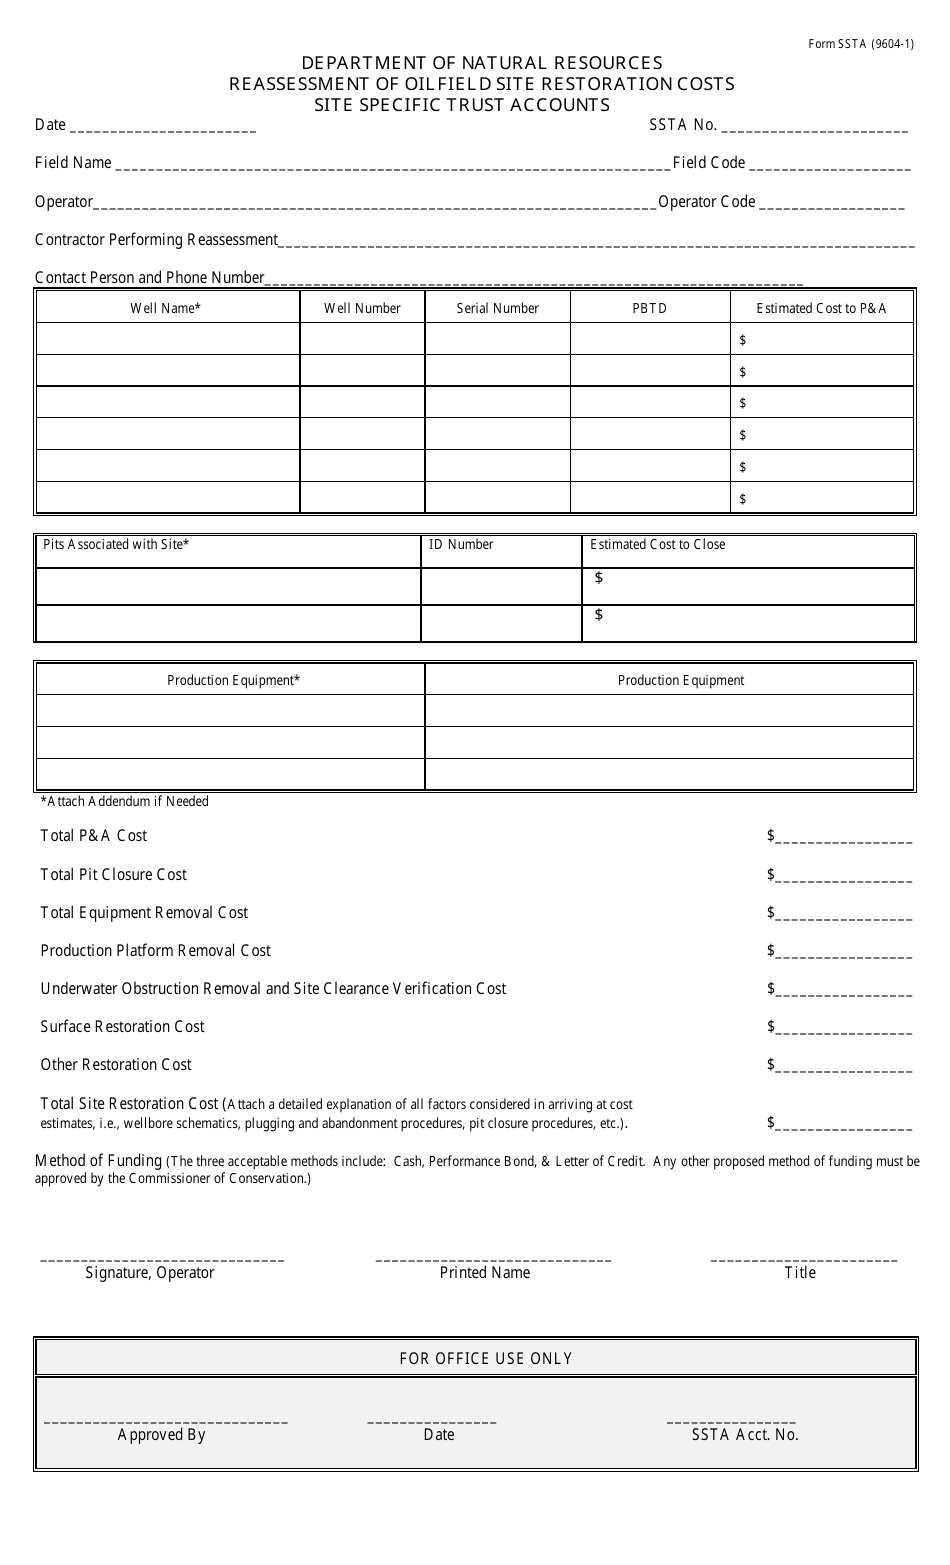 Form SSTA (9604-1) Site Specific Trust Accounts - Louisiana, Page 1